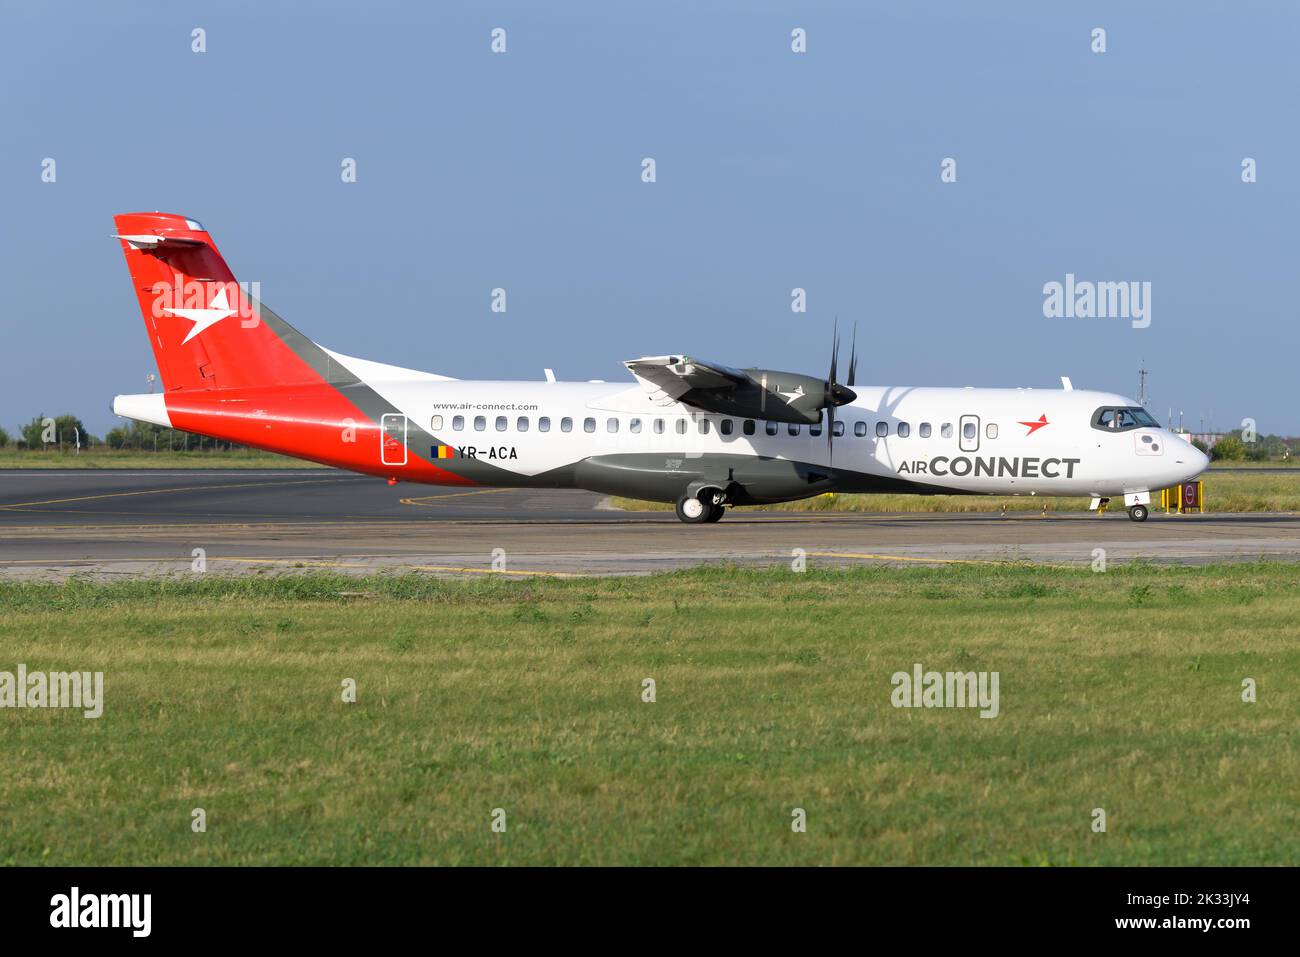 AirConnect ATR 72 airplane at Bucharest Airport. New airline from Romania called Air Connect. ATR 72-600 aircraft. Stock Photo